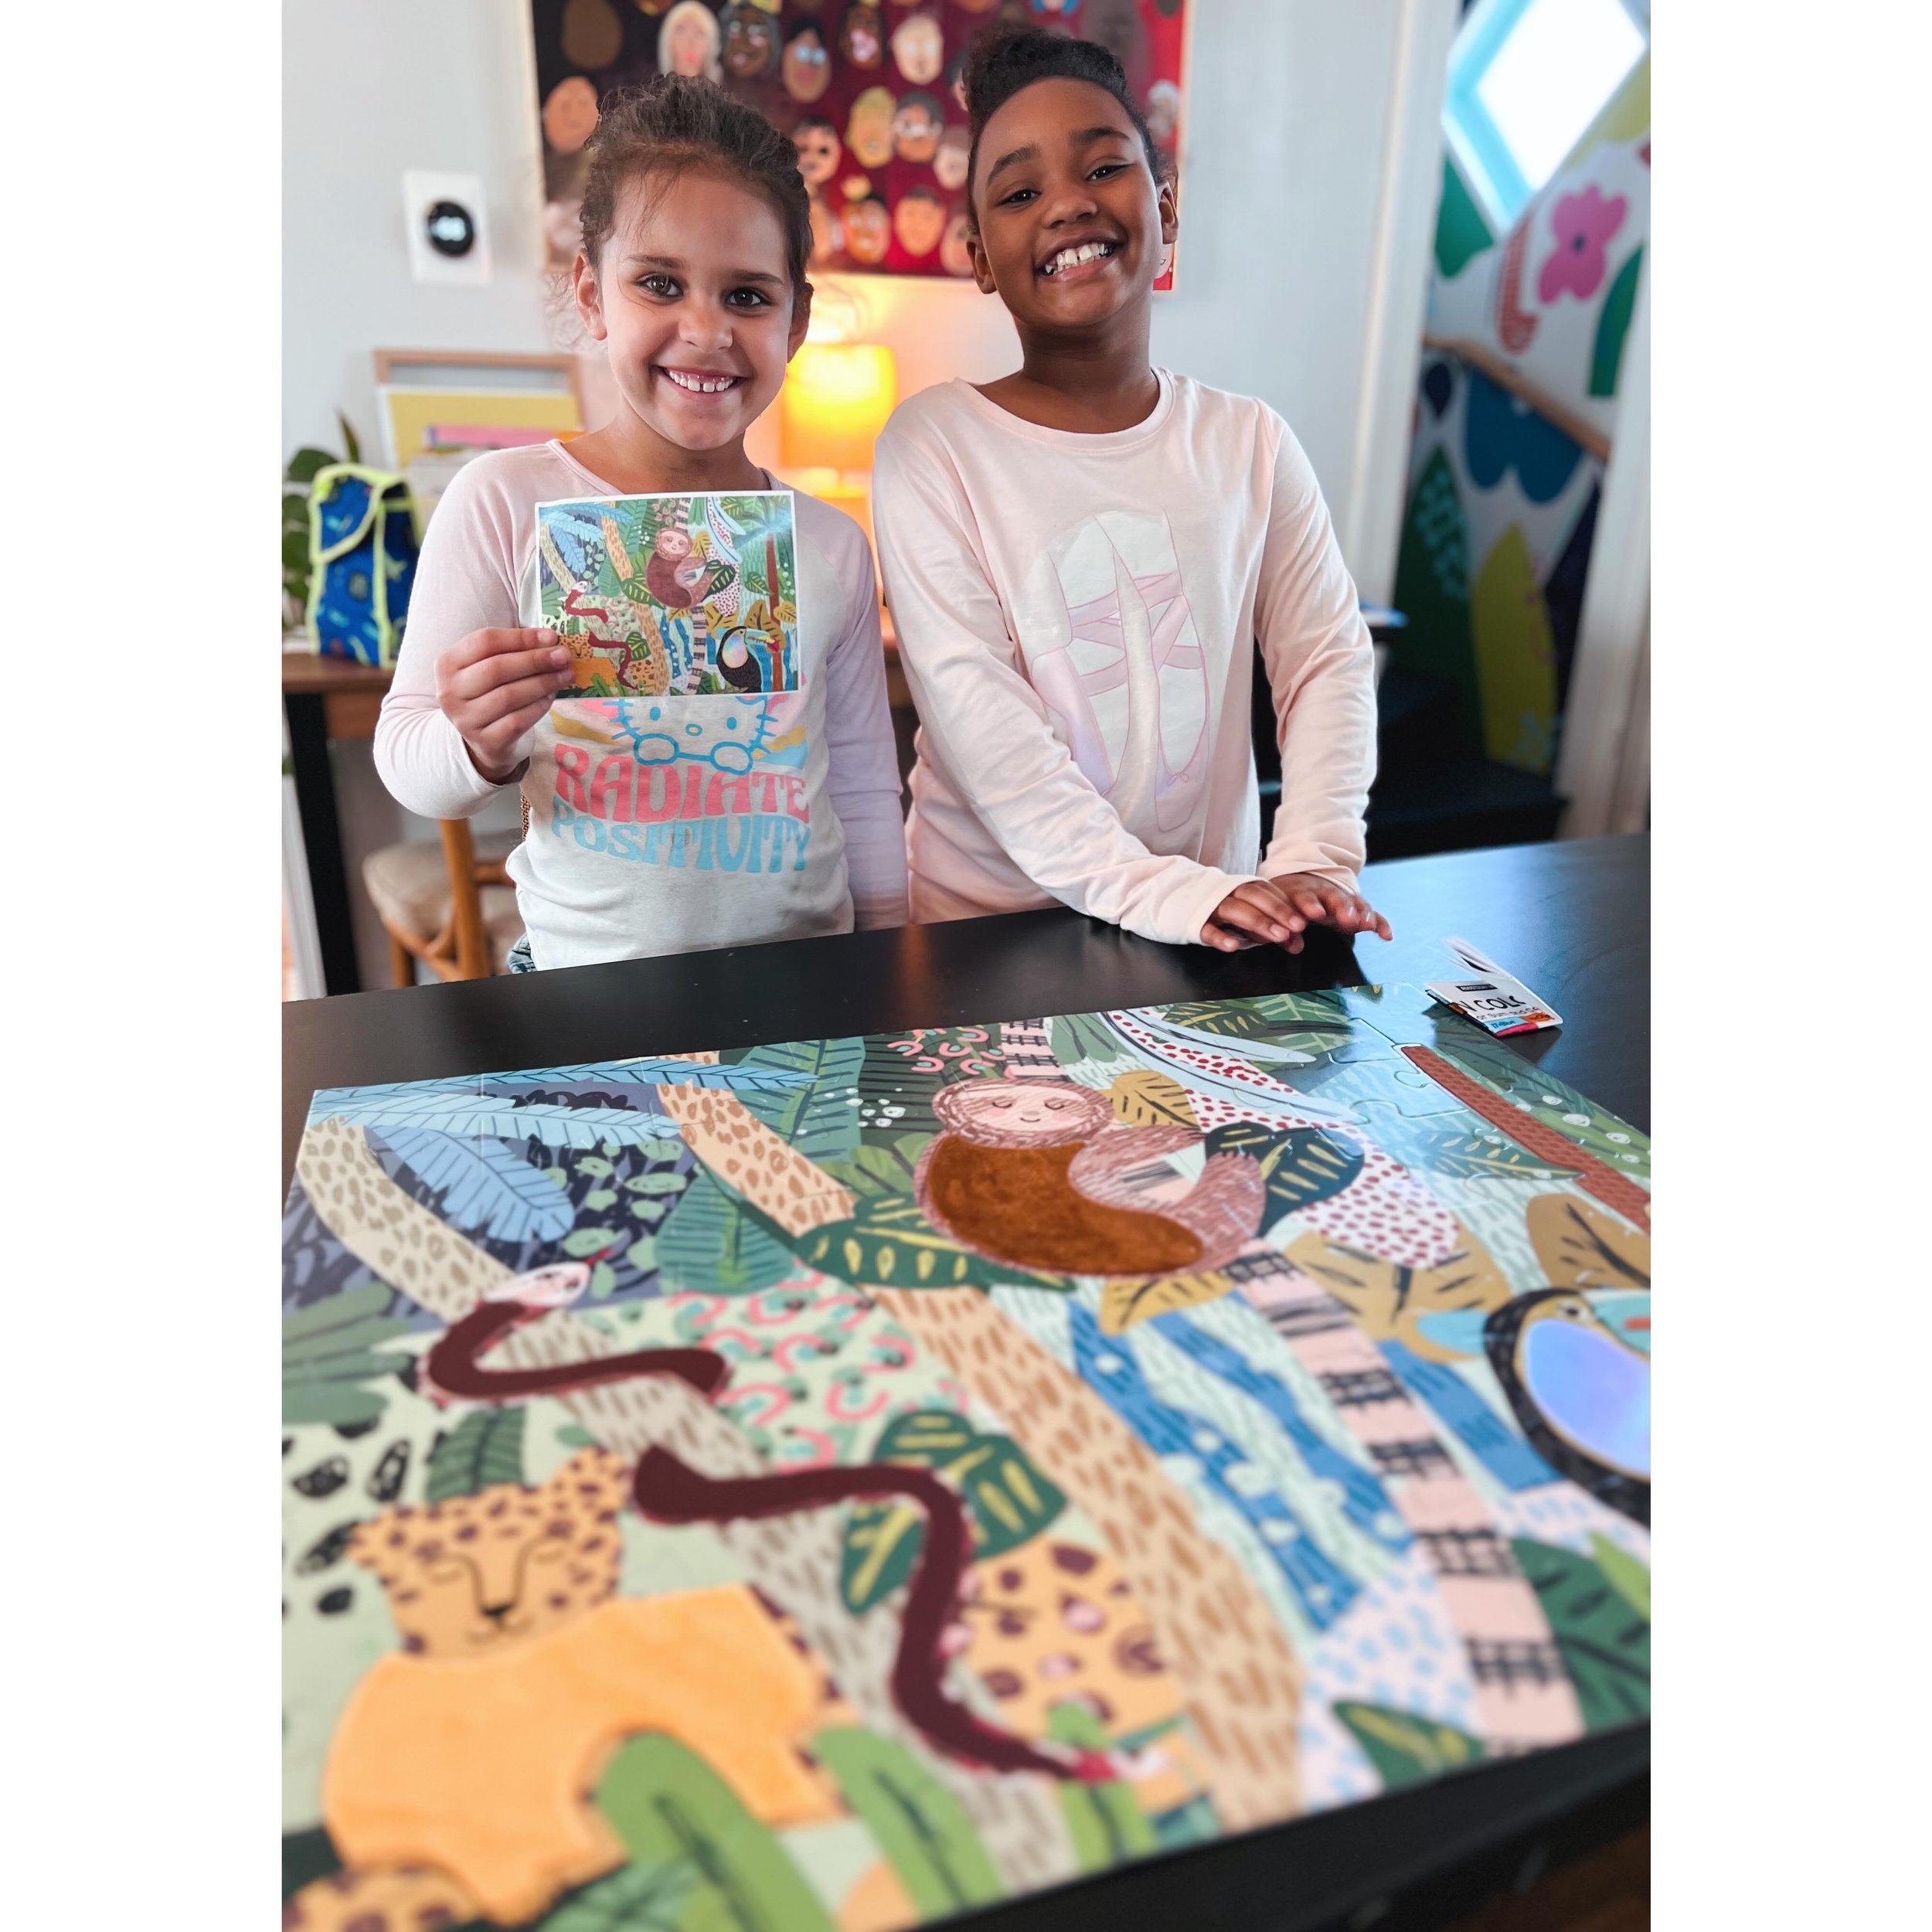 These two friends completed a fun puzzle this afternoon and had the best time working together. 

What a sweet moment and friendship forged at ACTS! 
#actsfamily #actsministry #wetfeetacts